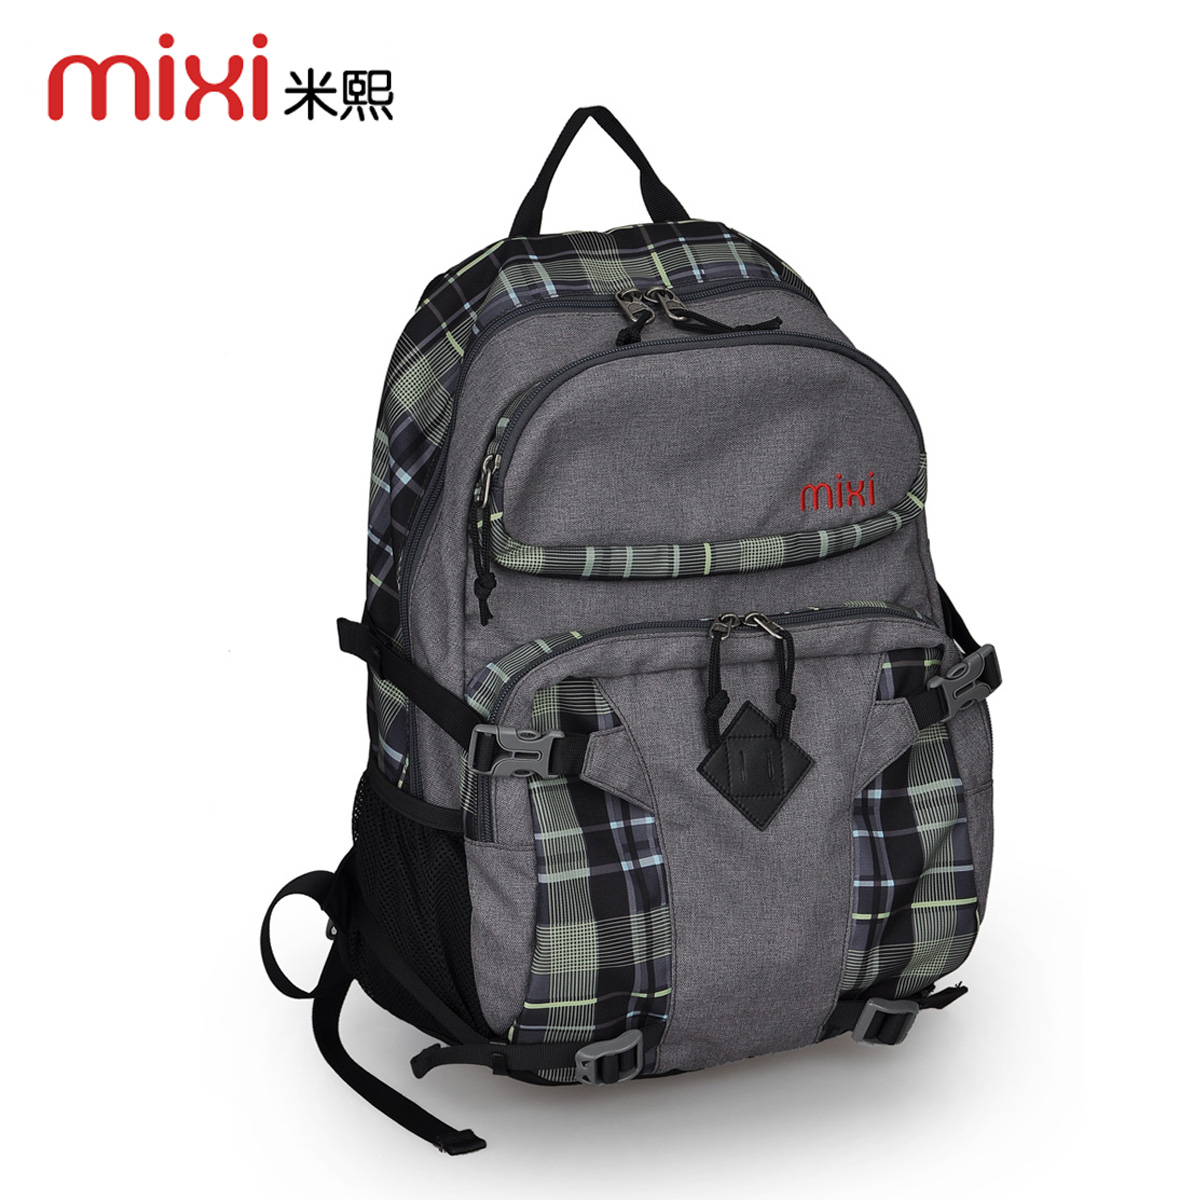 ... travel backpacks bag for hiking middle school students school bags